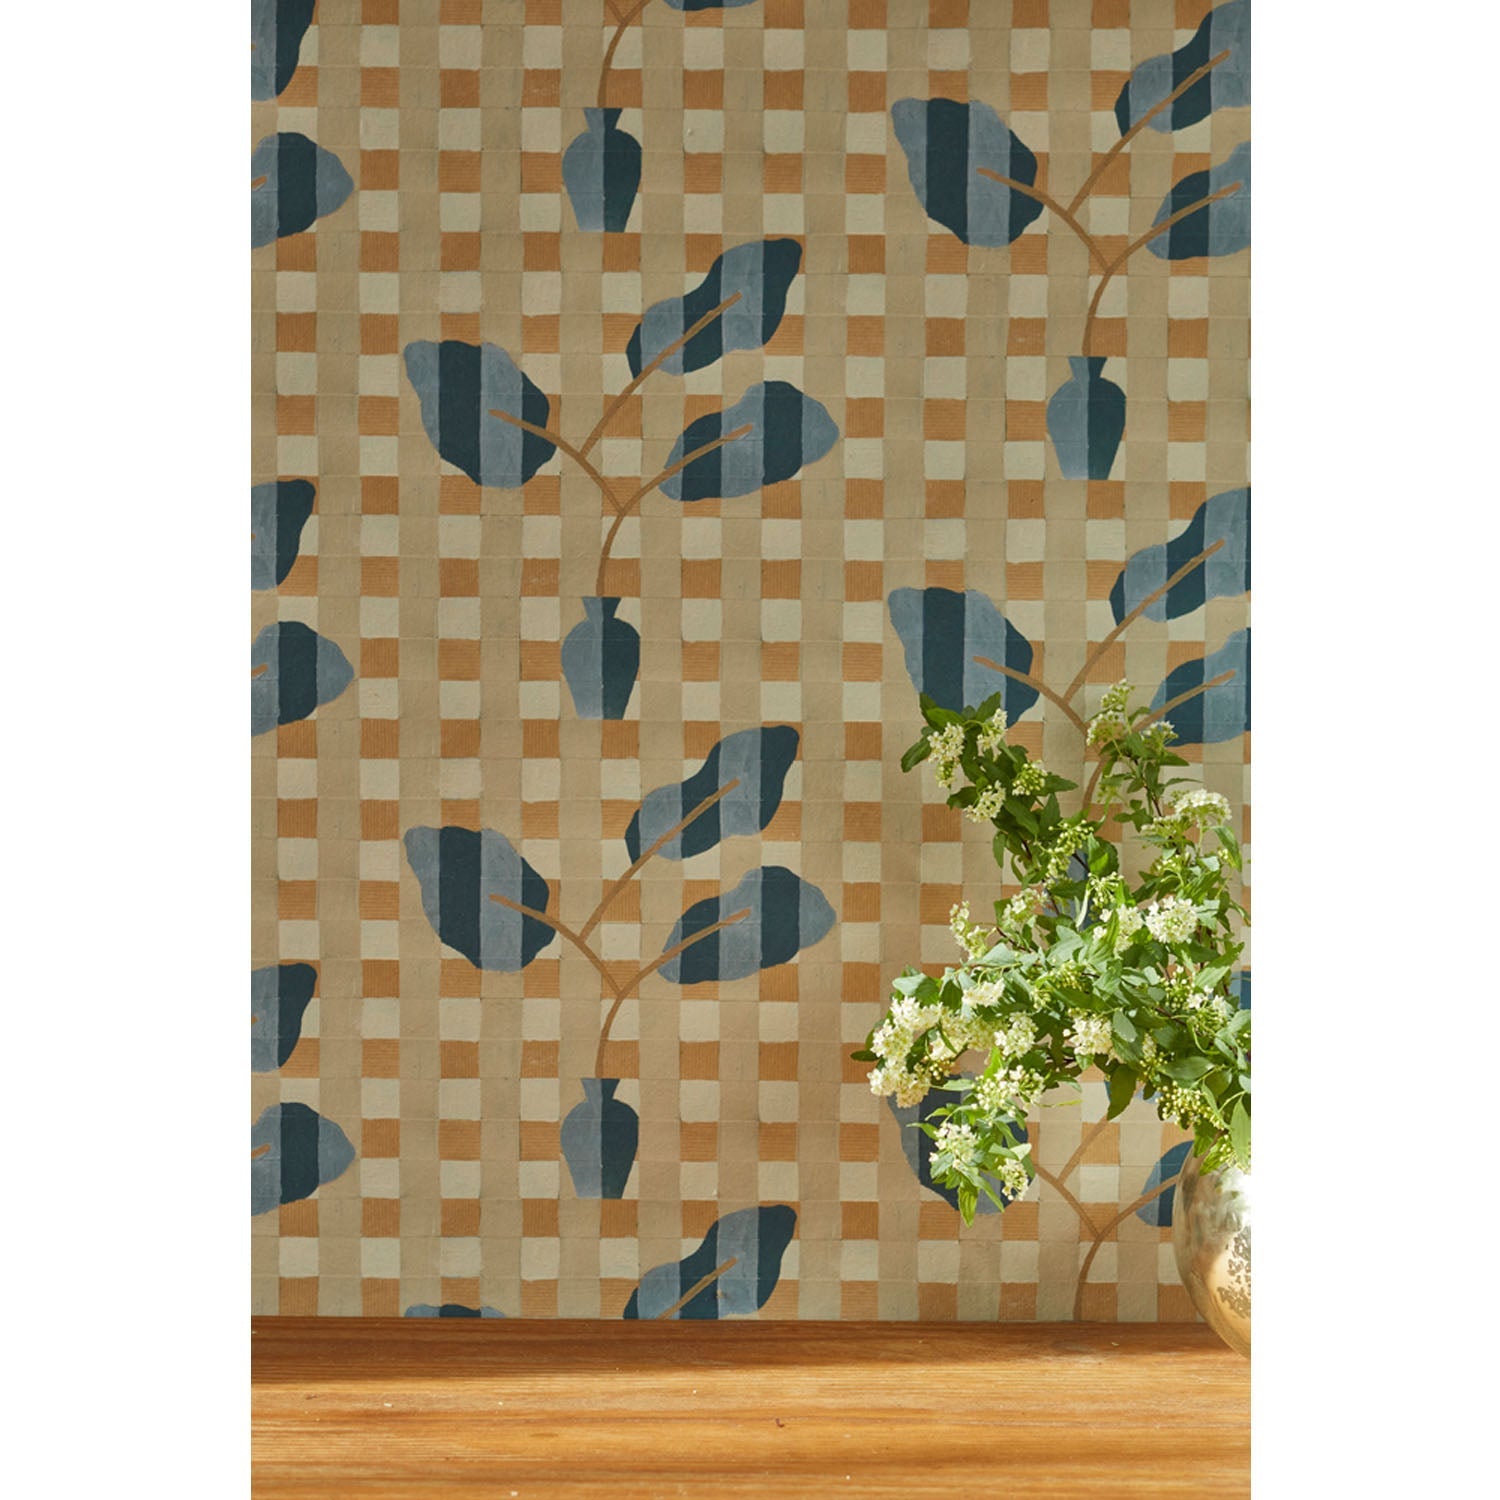 A small white and green floral arrangement at the left edge of the frame against a wallpaper with a complex cornflower and dark blue striped floral motif overlayed a white and tan plaid pattern, hover